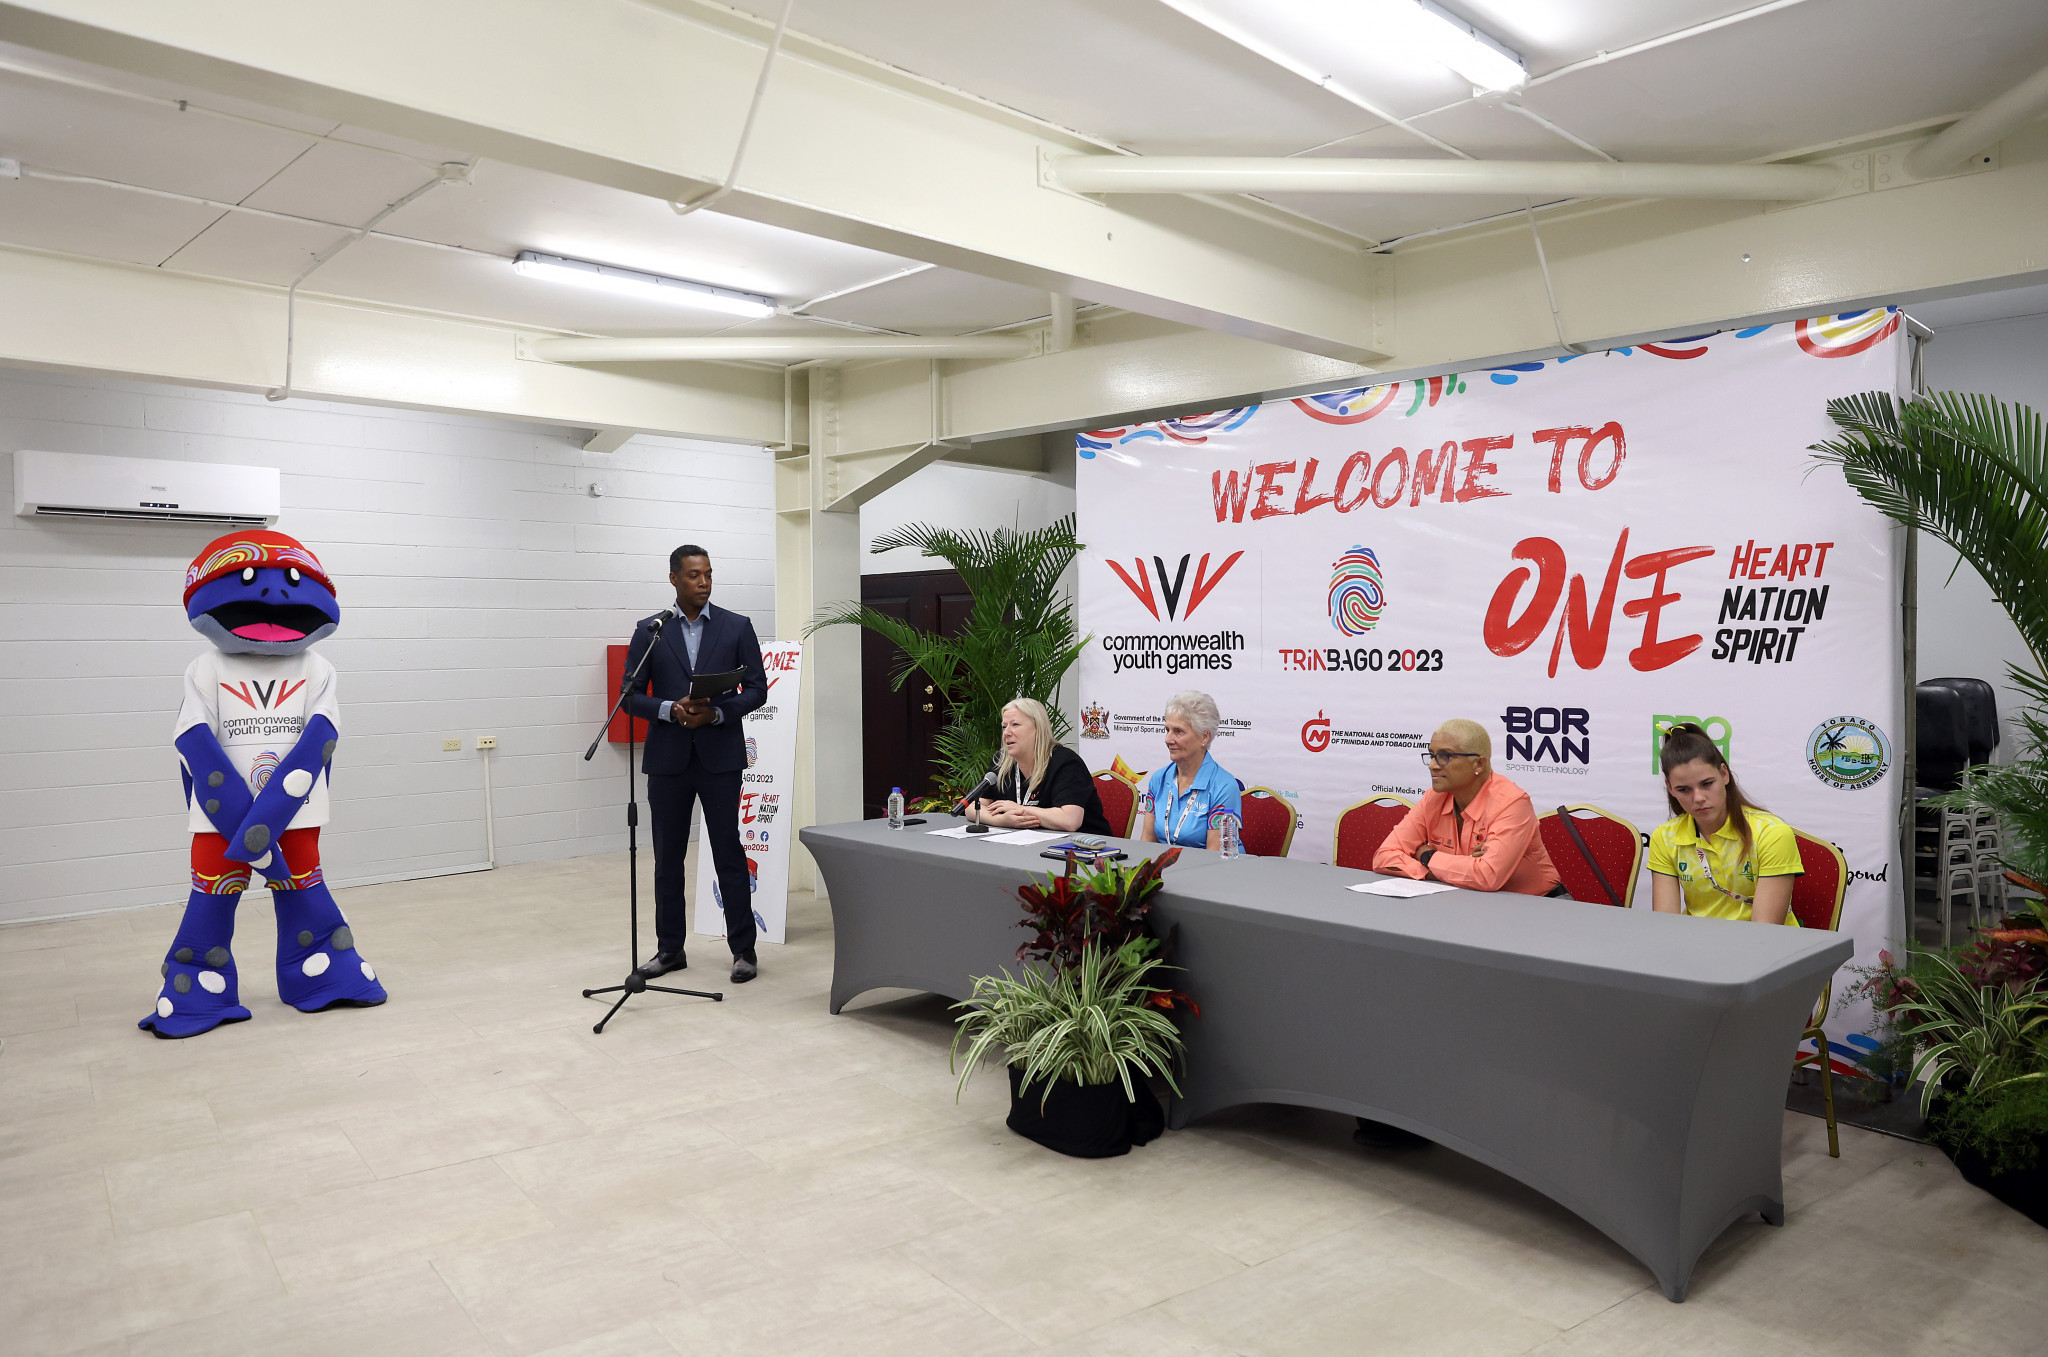 Organisers promise all venues ready for Trinbago 2023 despite late arrival of beach volleyball sand